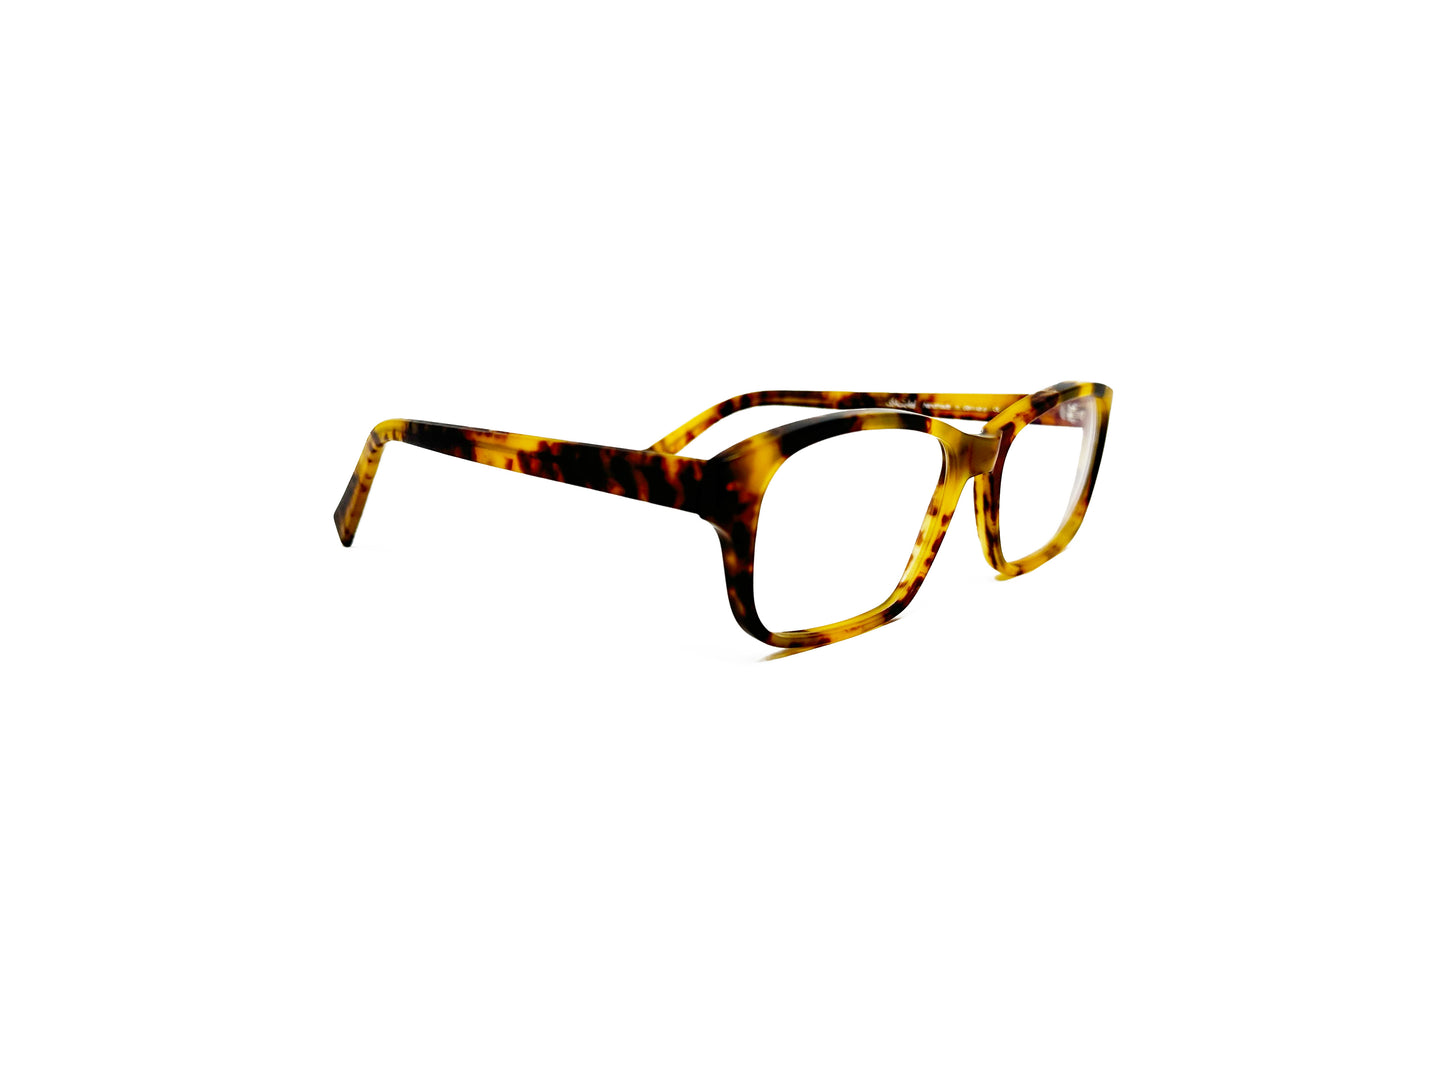 Schmnchel rectangular acetate optical frame with curved top. Model: 3390. Color: 111 - Yellow Havana. Side view.